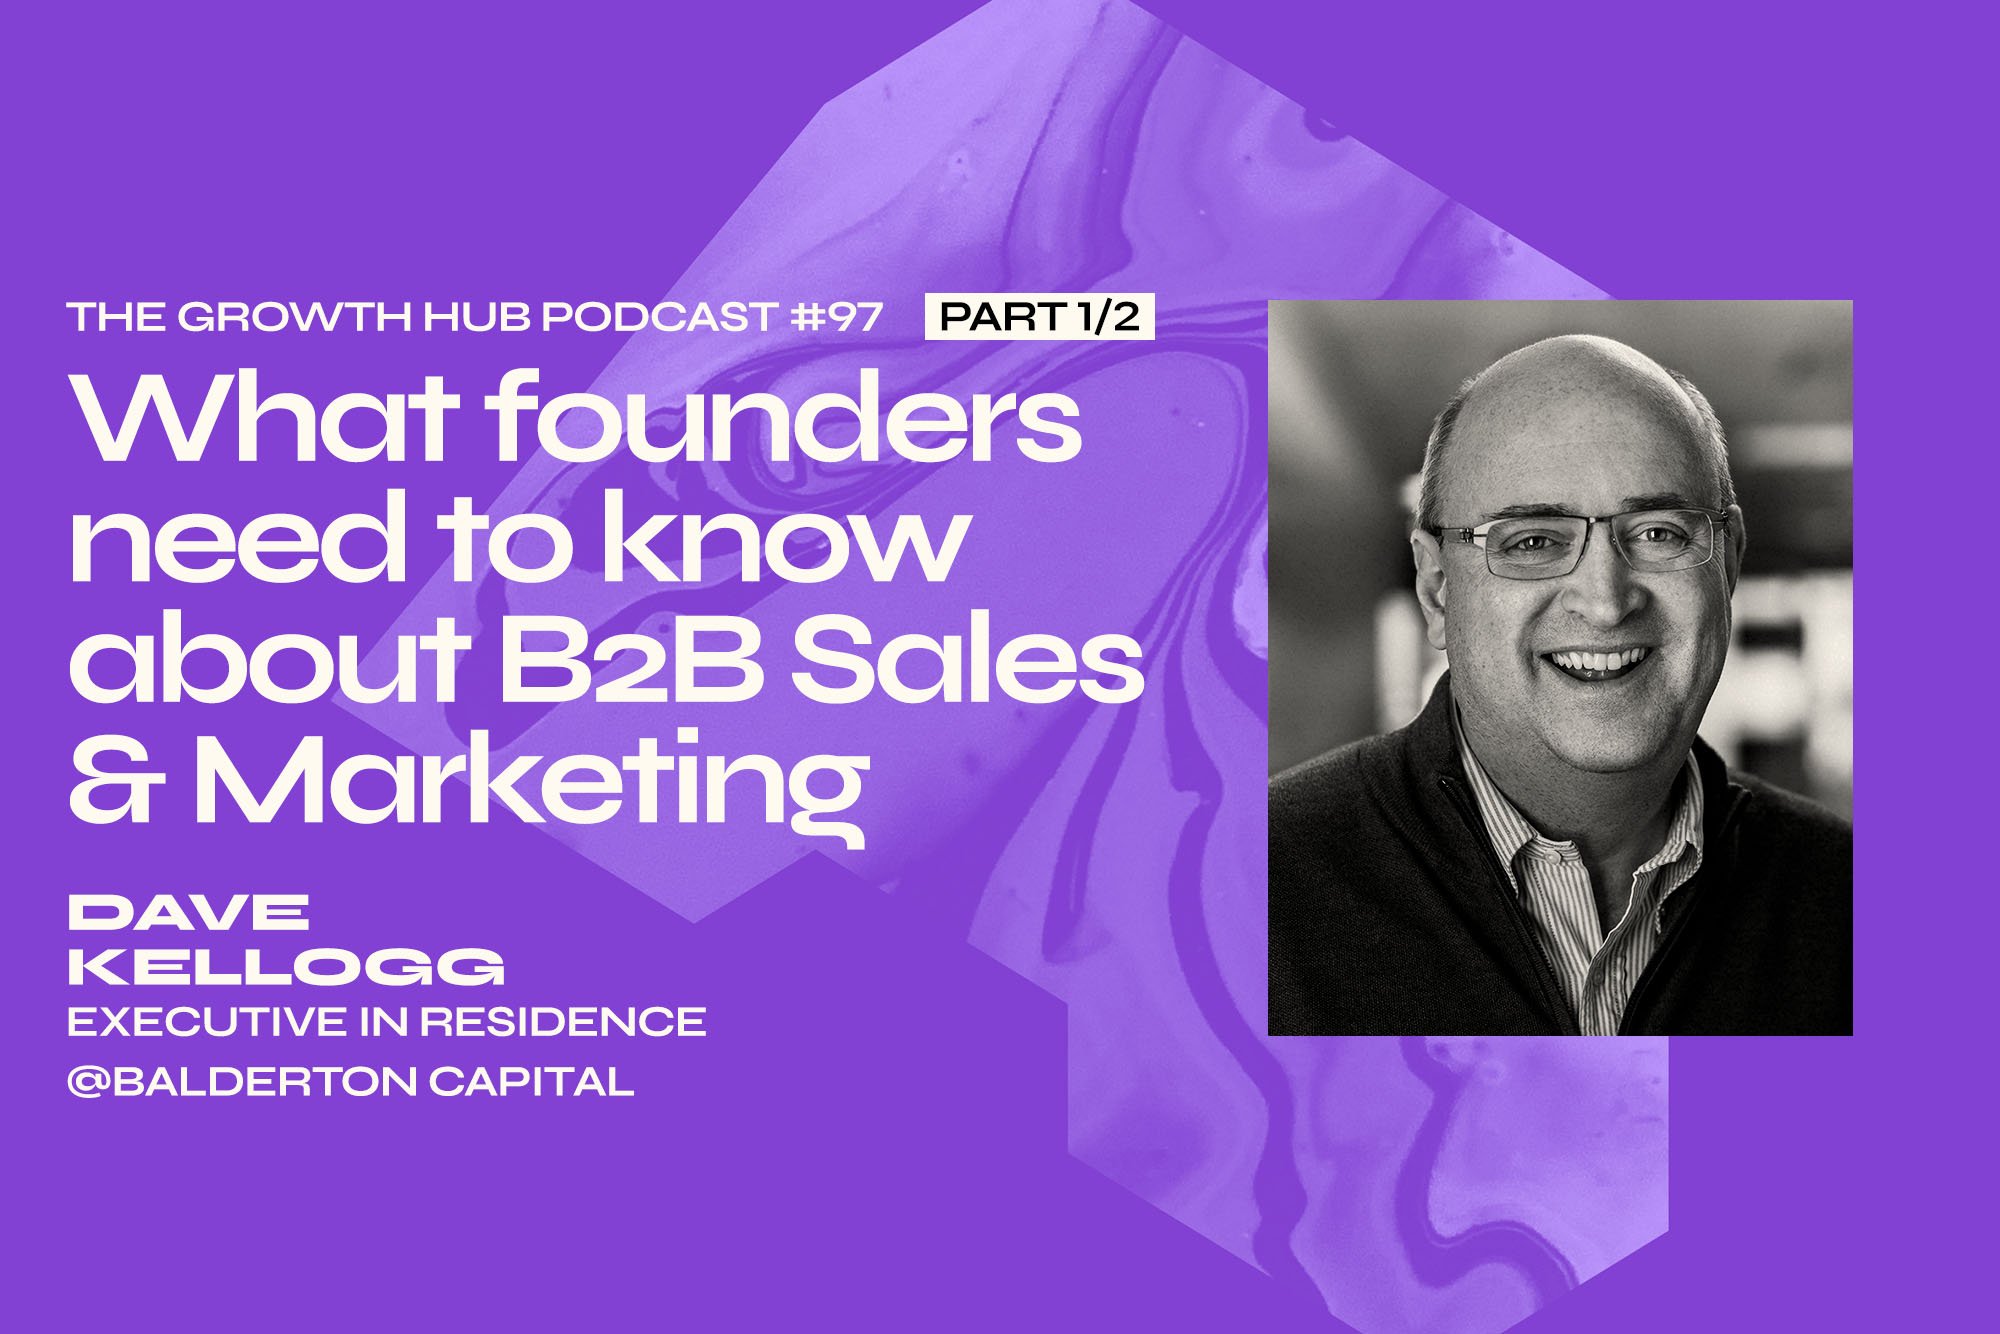 What founders need to know about B2B Sales and Marketing